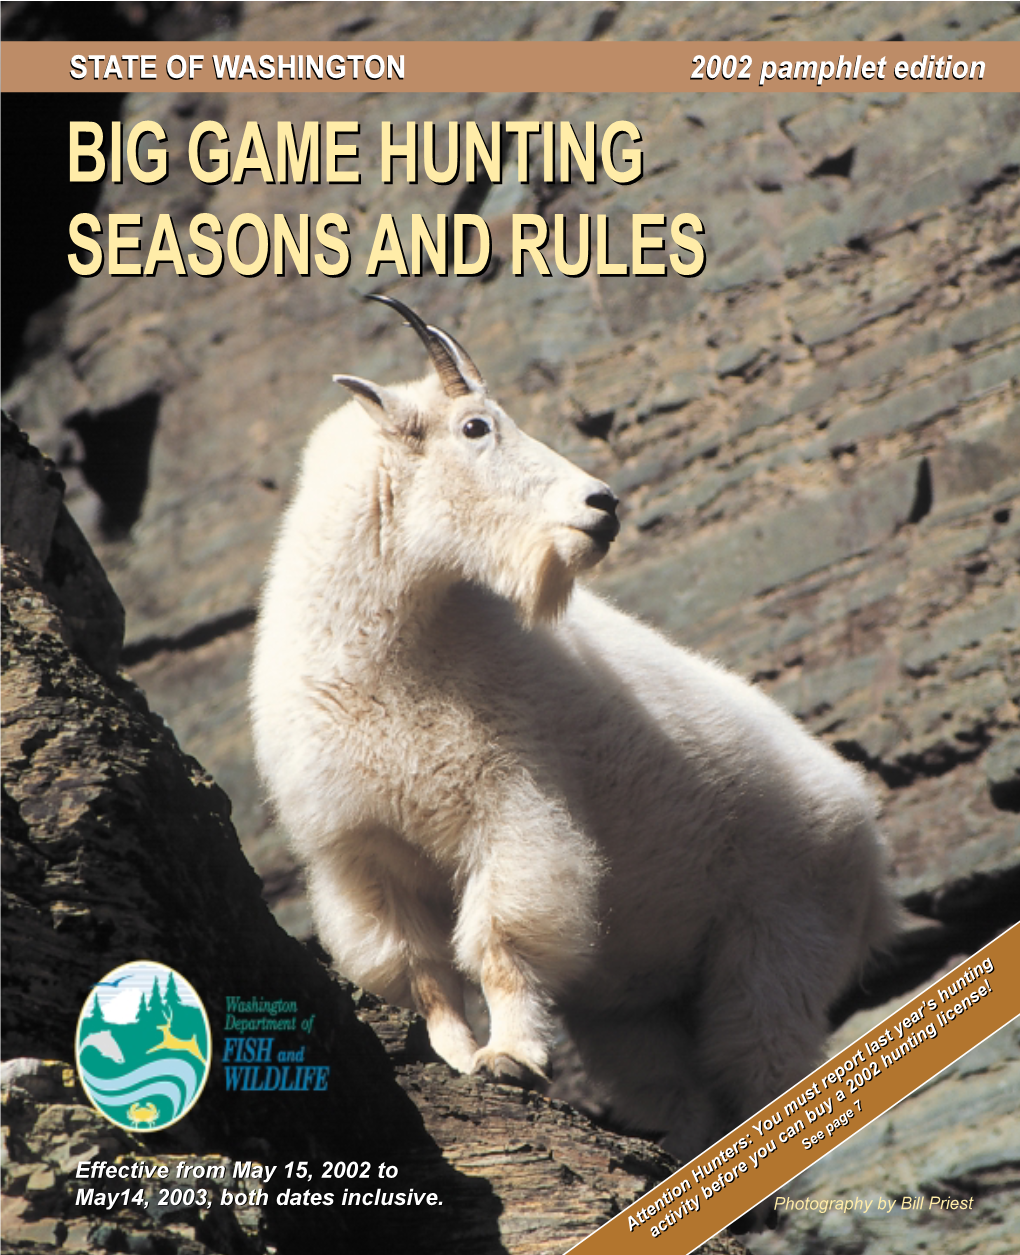 2002 Big Game Hunting Seasons and Rules Pamphlet